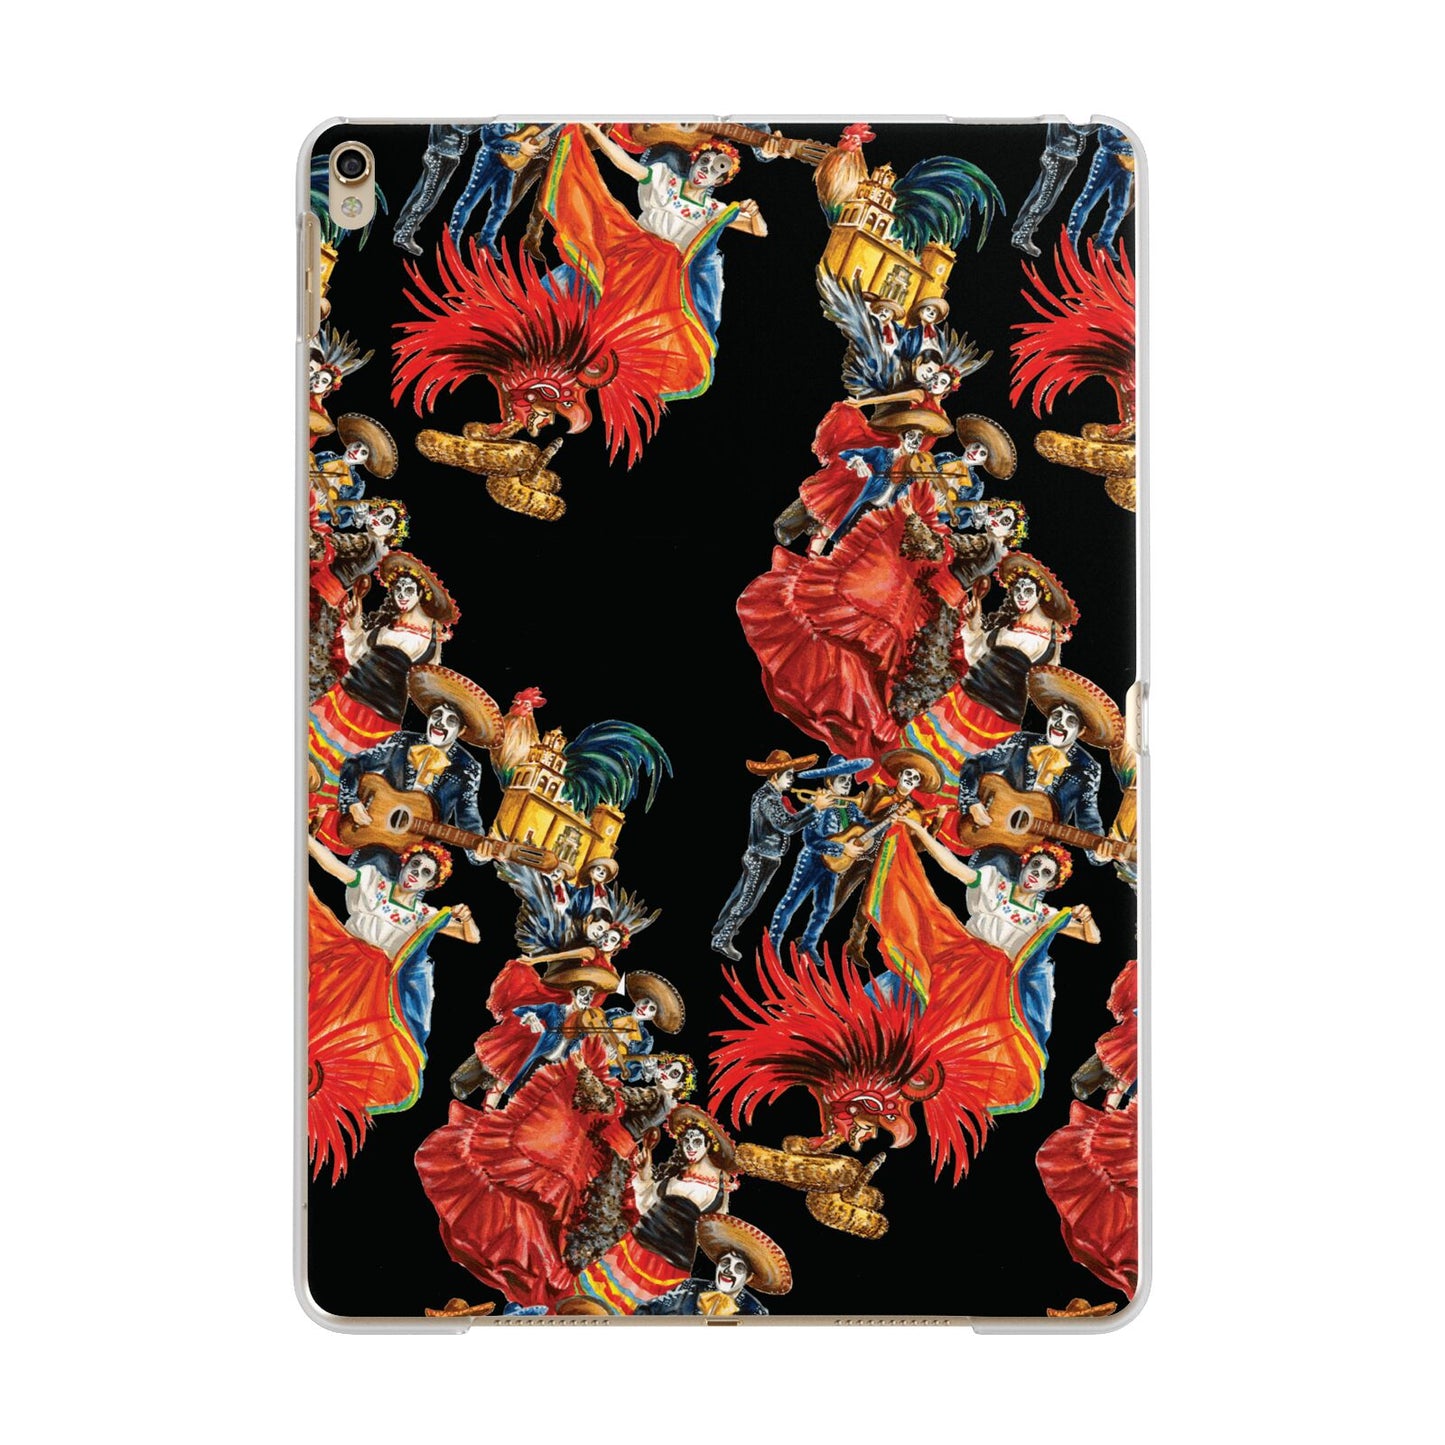 Day of the Dead Festival Apple iPad Gold Case